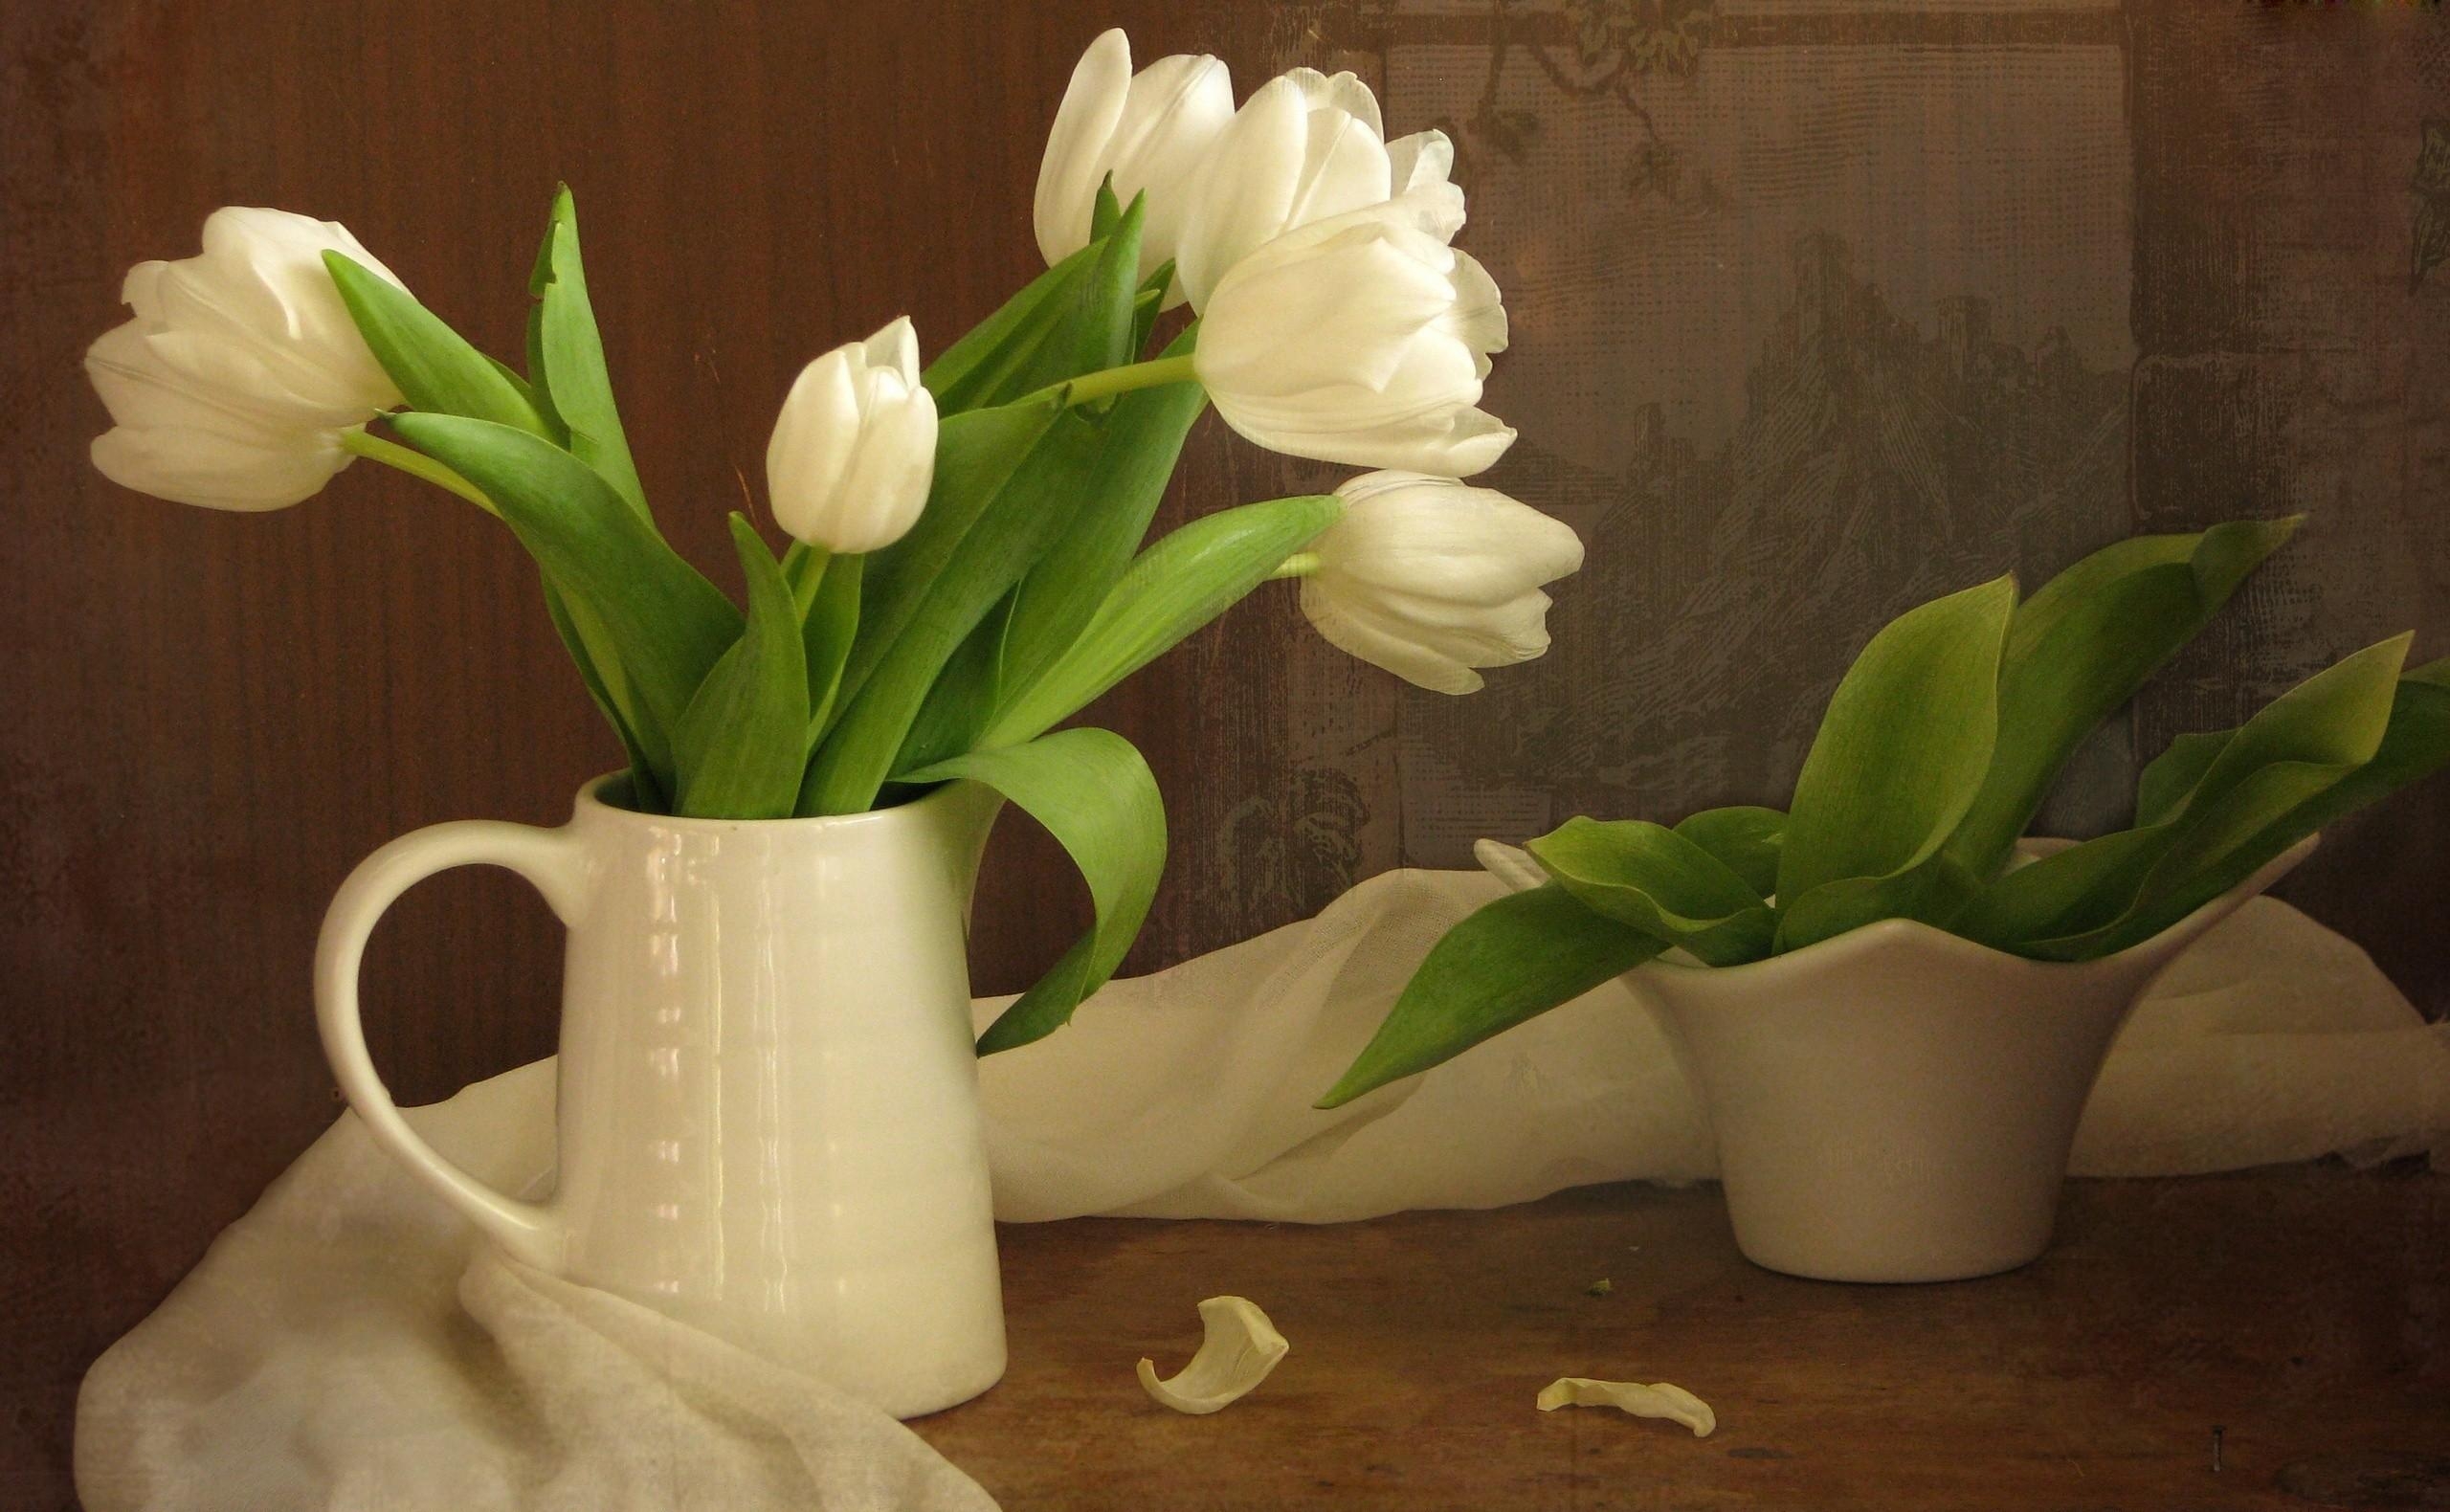 flowers, tulips, white, greens, bouquet, jug, snow white, scarf